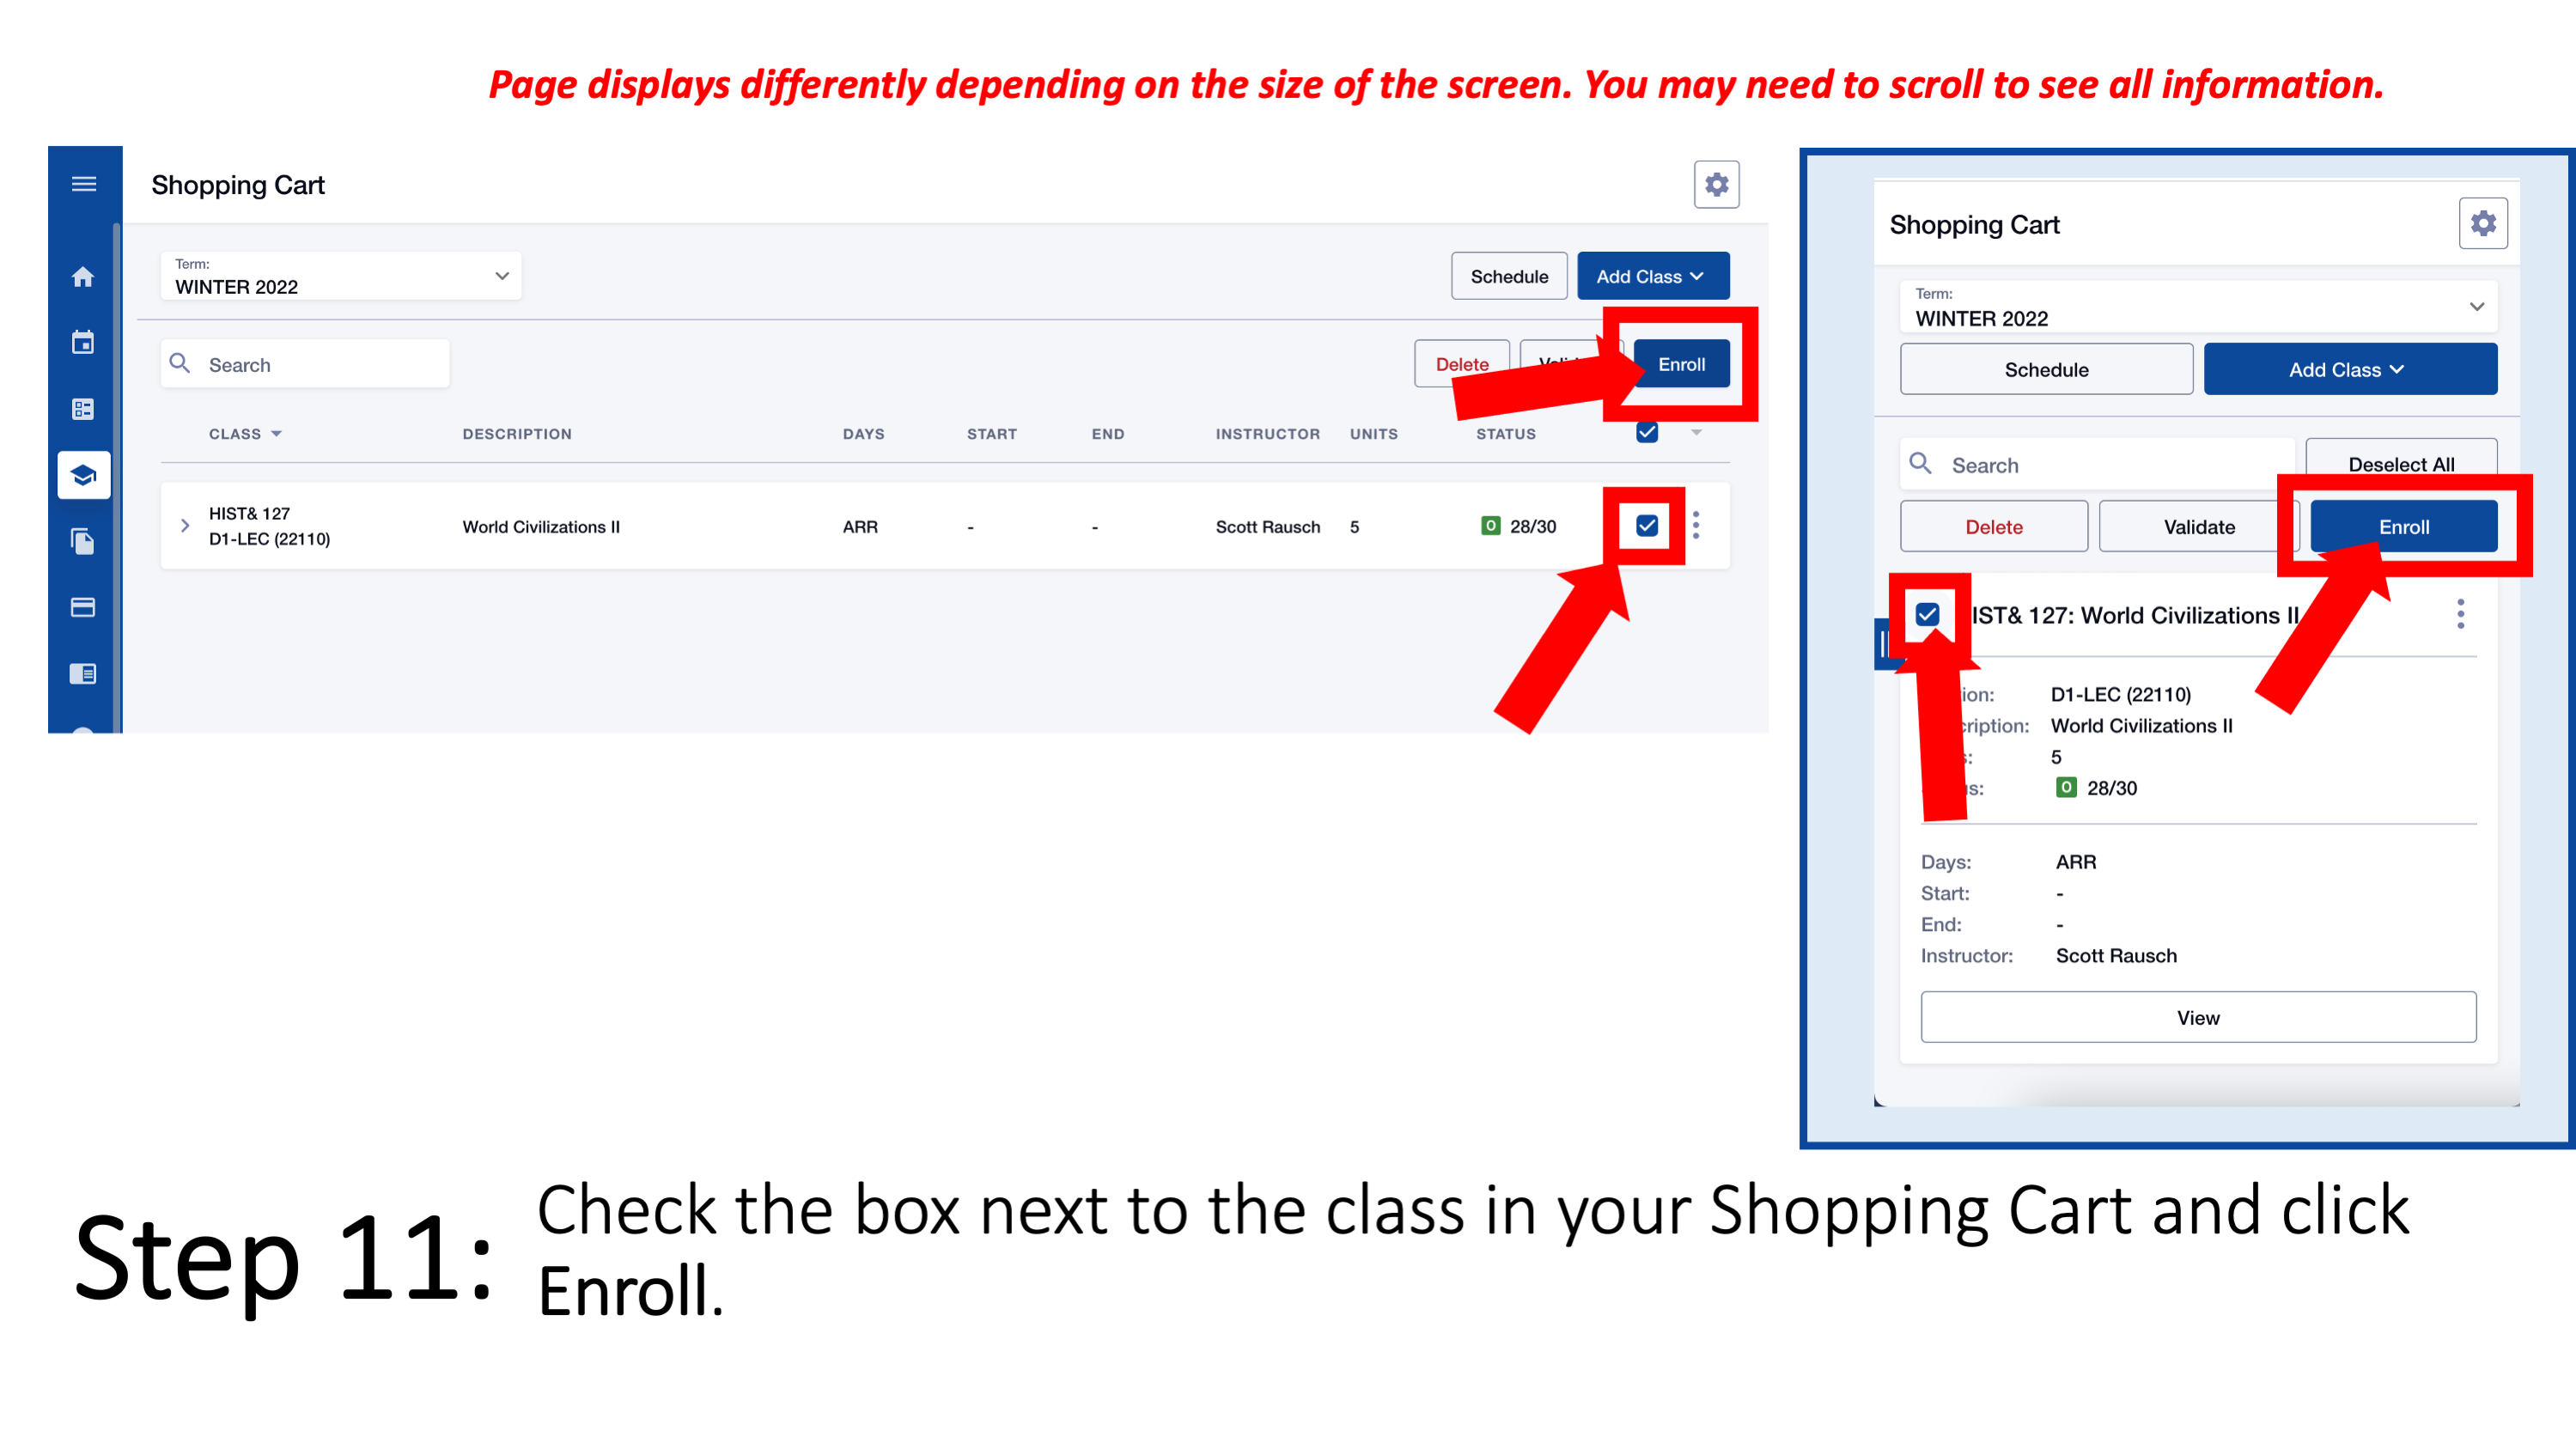 Step 11: Check the box next to the class in your Shopping Cart and click Enroll.